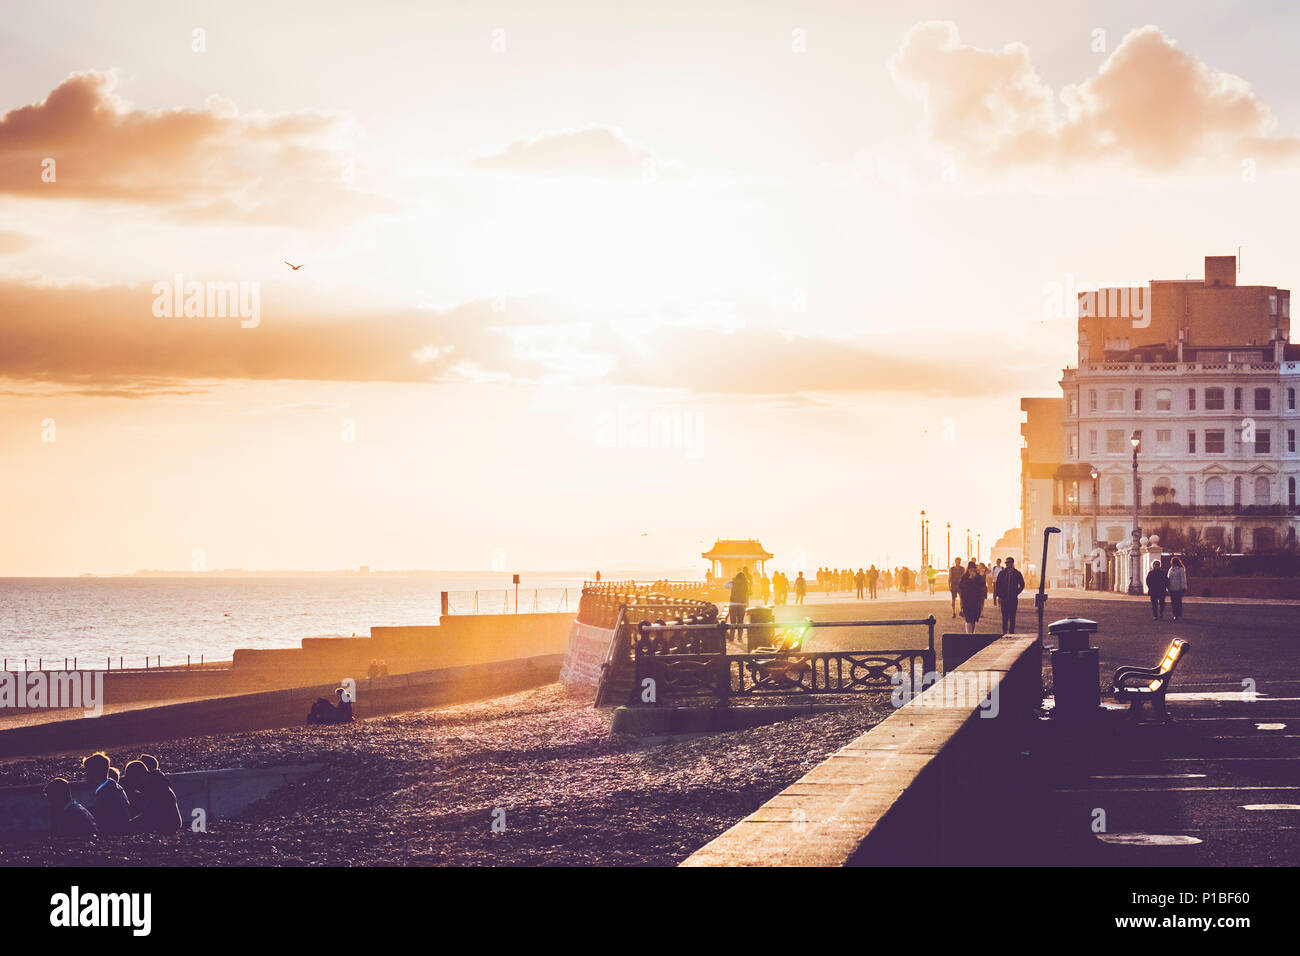 Seafront in the evening sun, Brighton, England Stock Photo